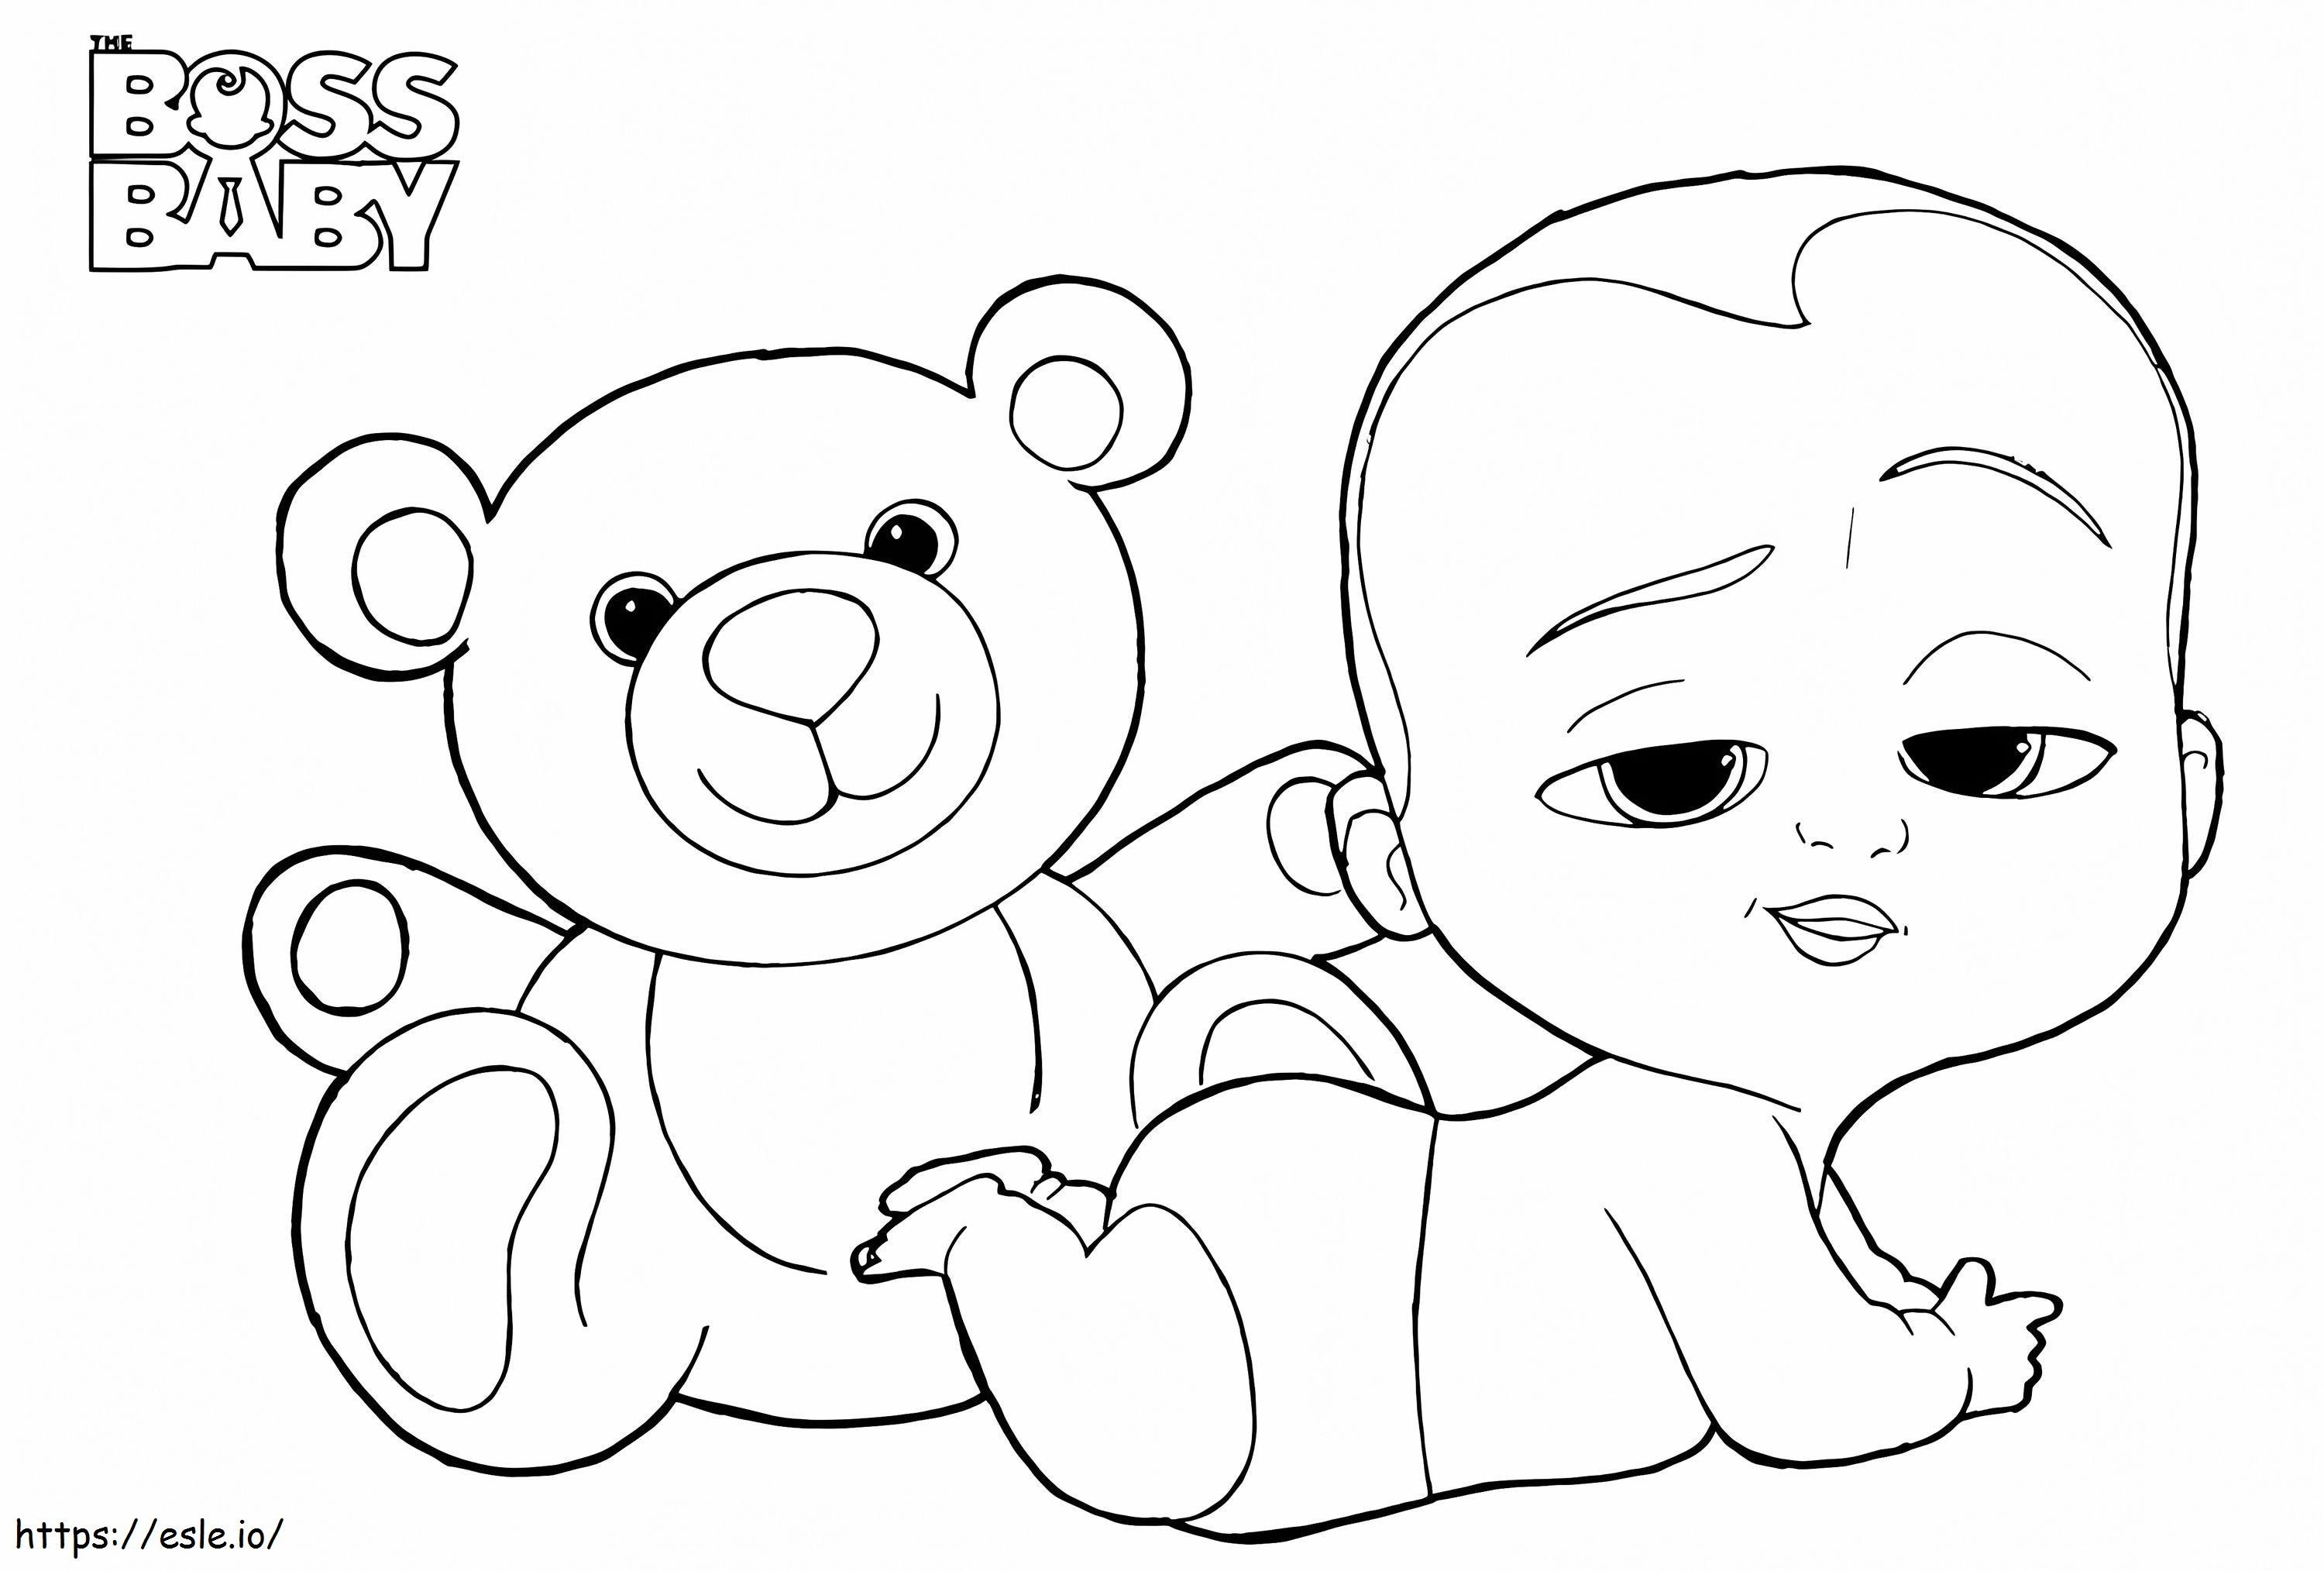 _Boss Baby And Teddy A4 para colorir